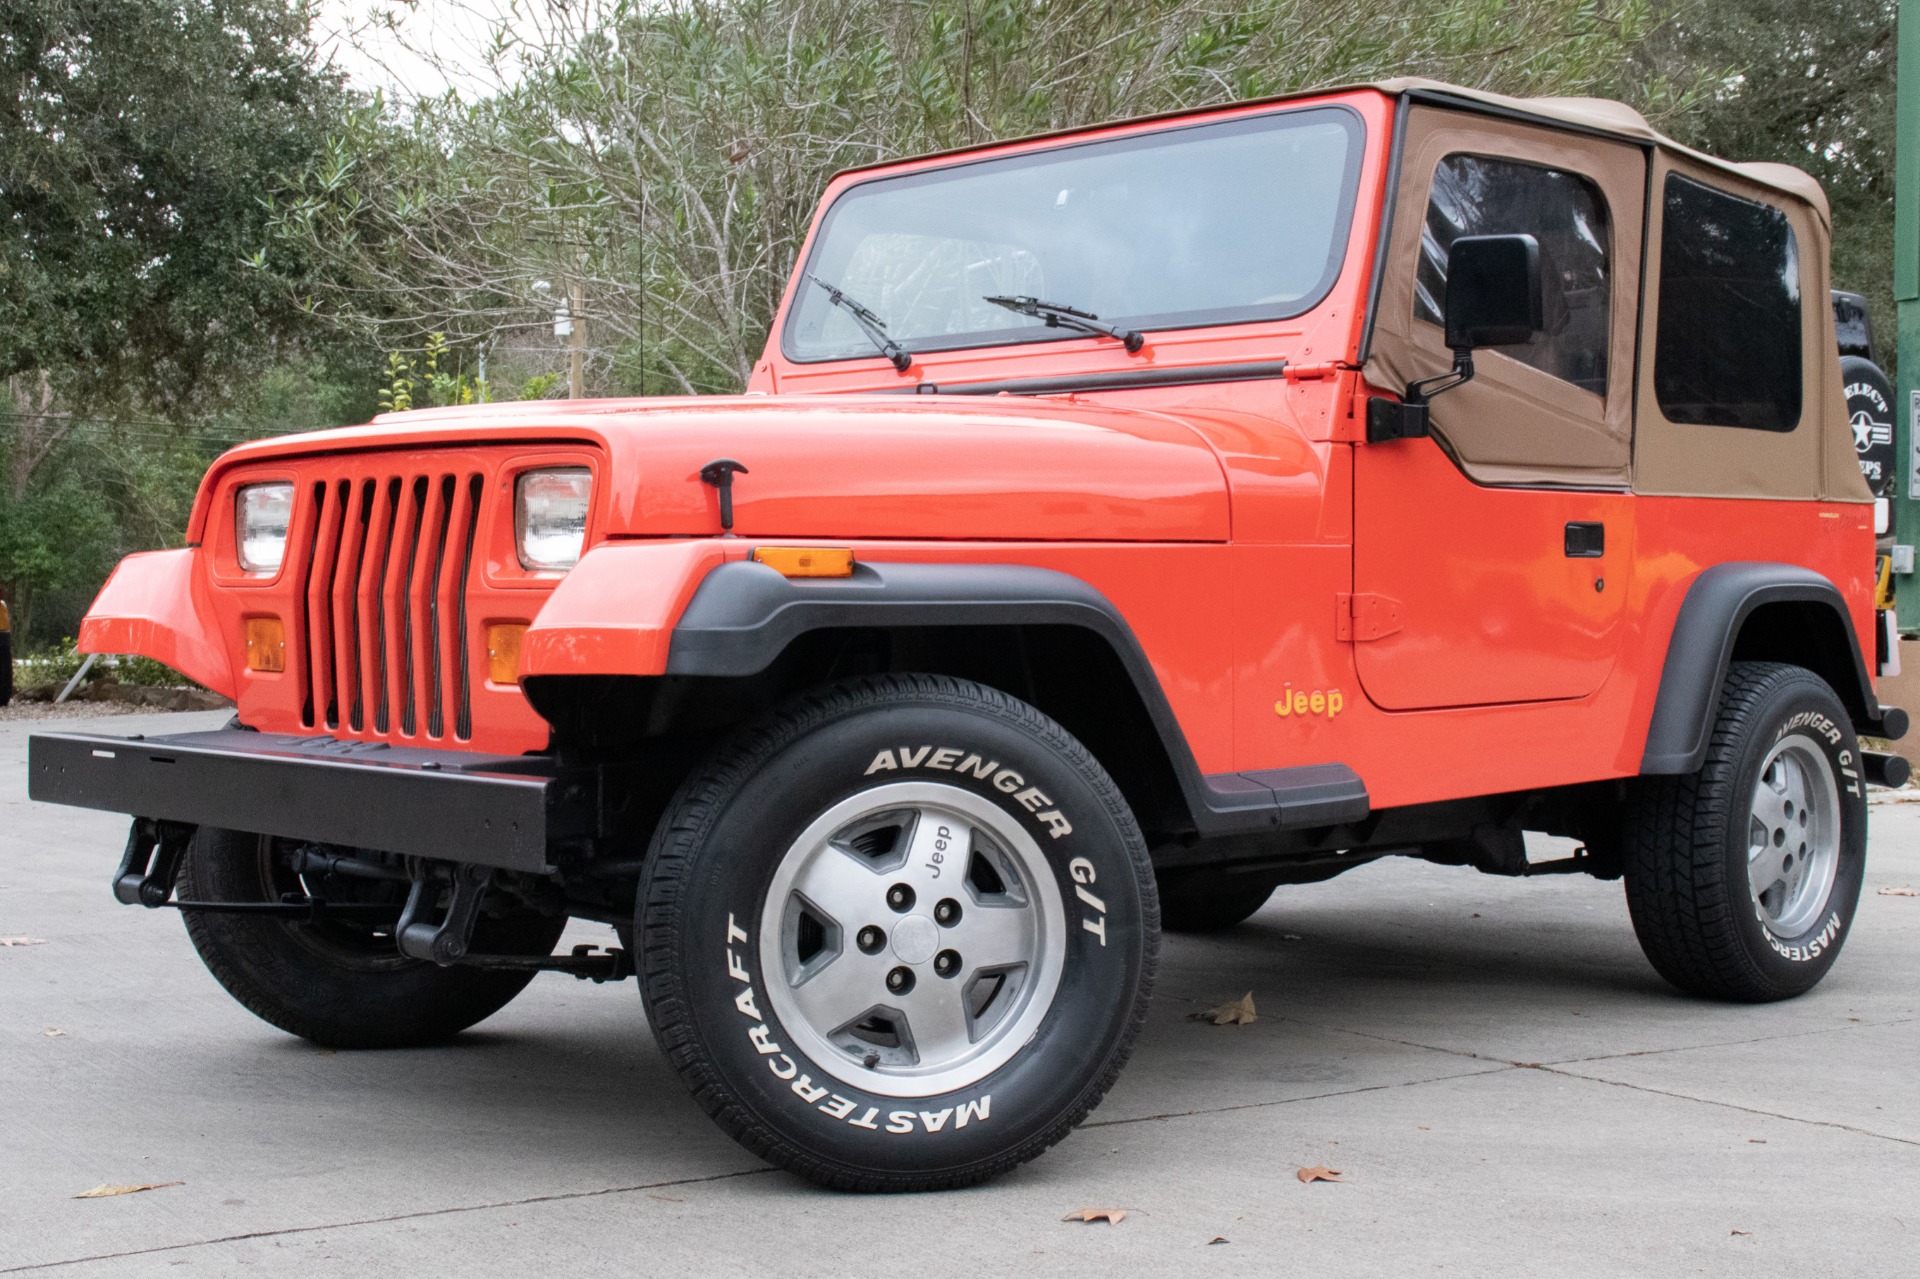 Used 1995 Jeep Wrangler S For Sale 10 995 Select Jeeps